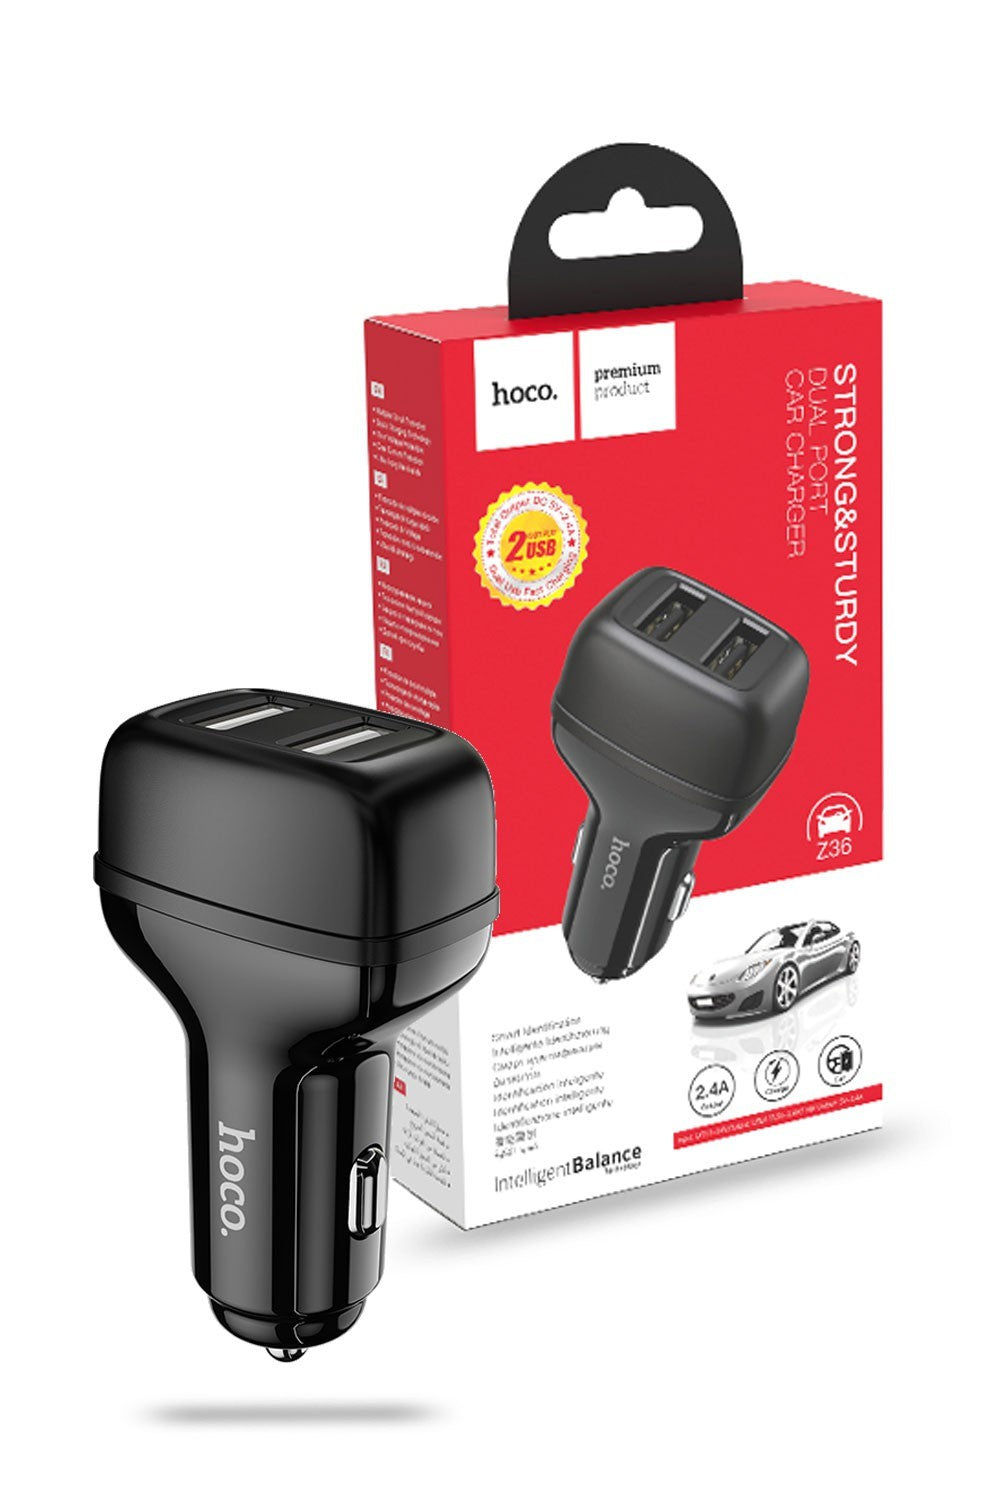 Hoco 2.4A USB Car Charger Dual Port Fast Charge with Cable Z36